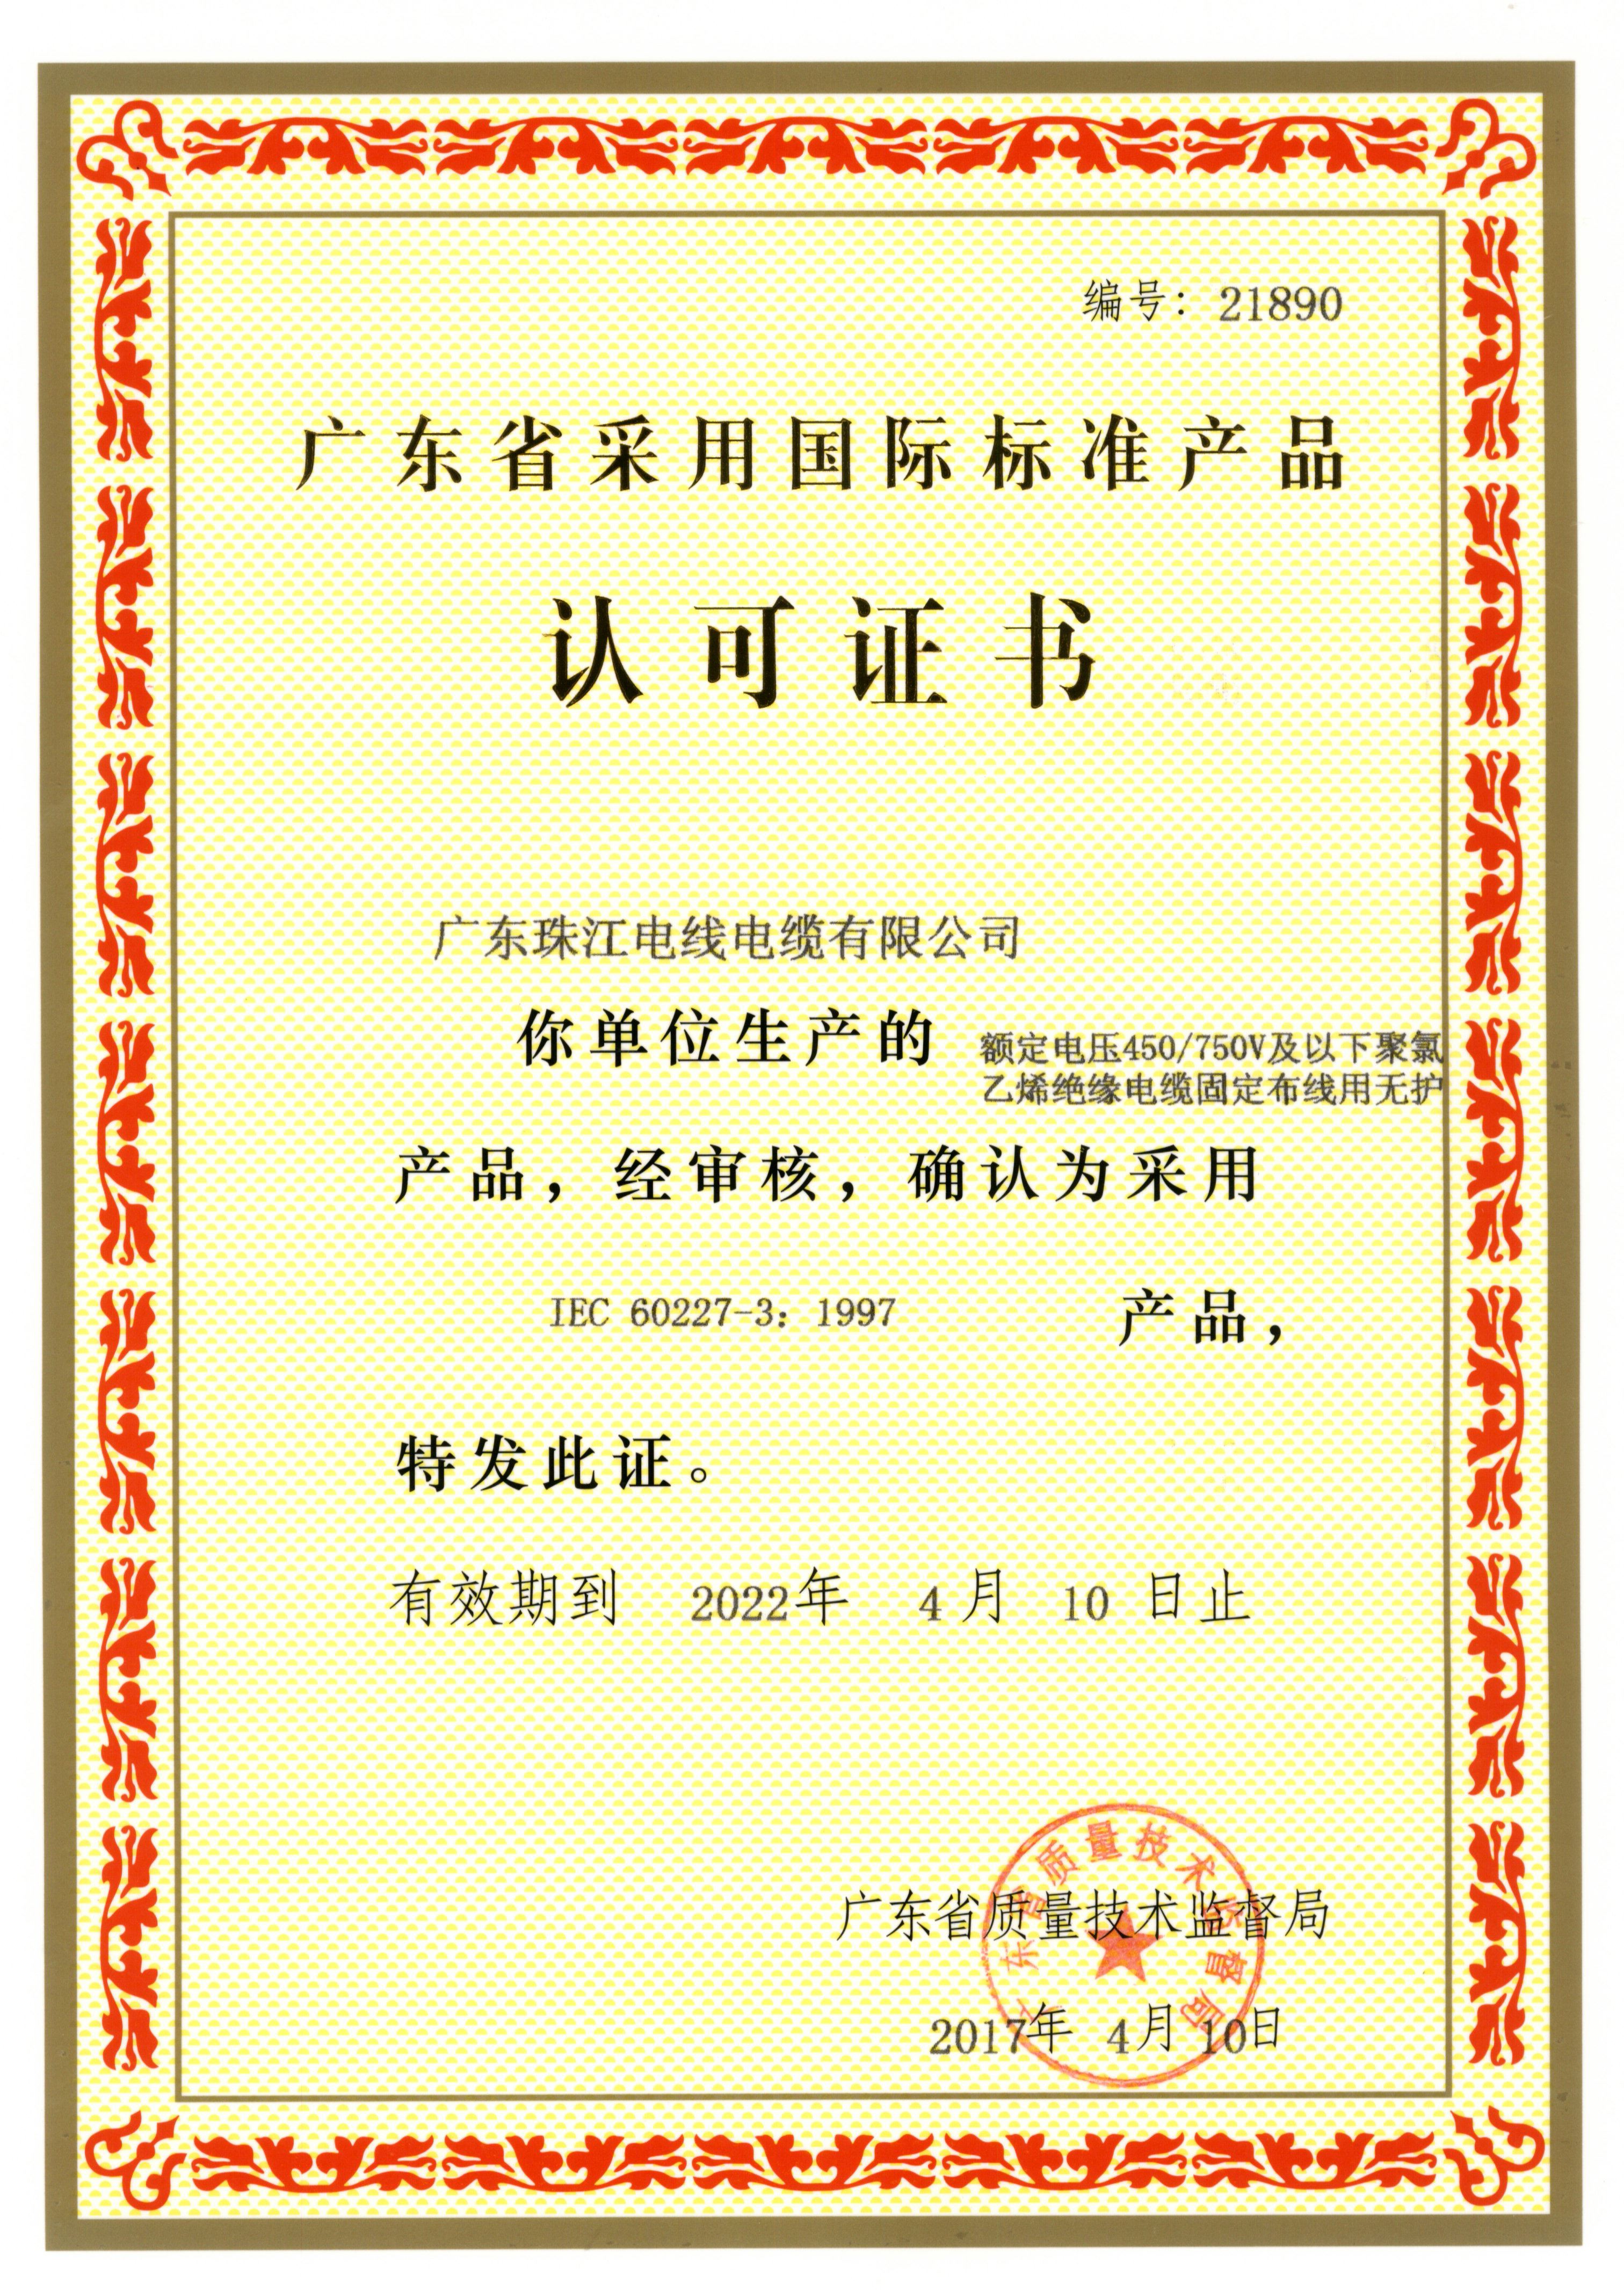 Adopt national standard product recognition certificate (890)